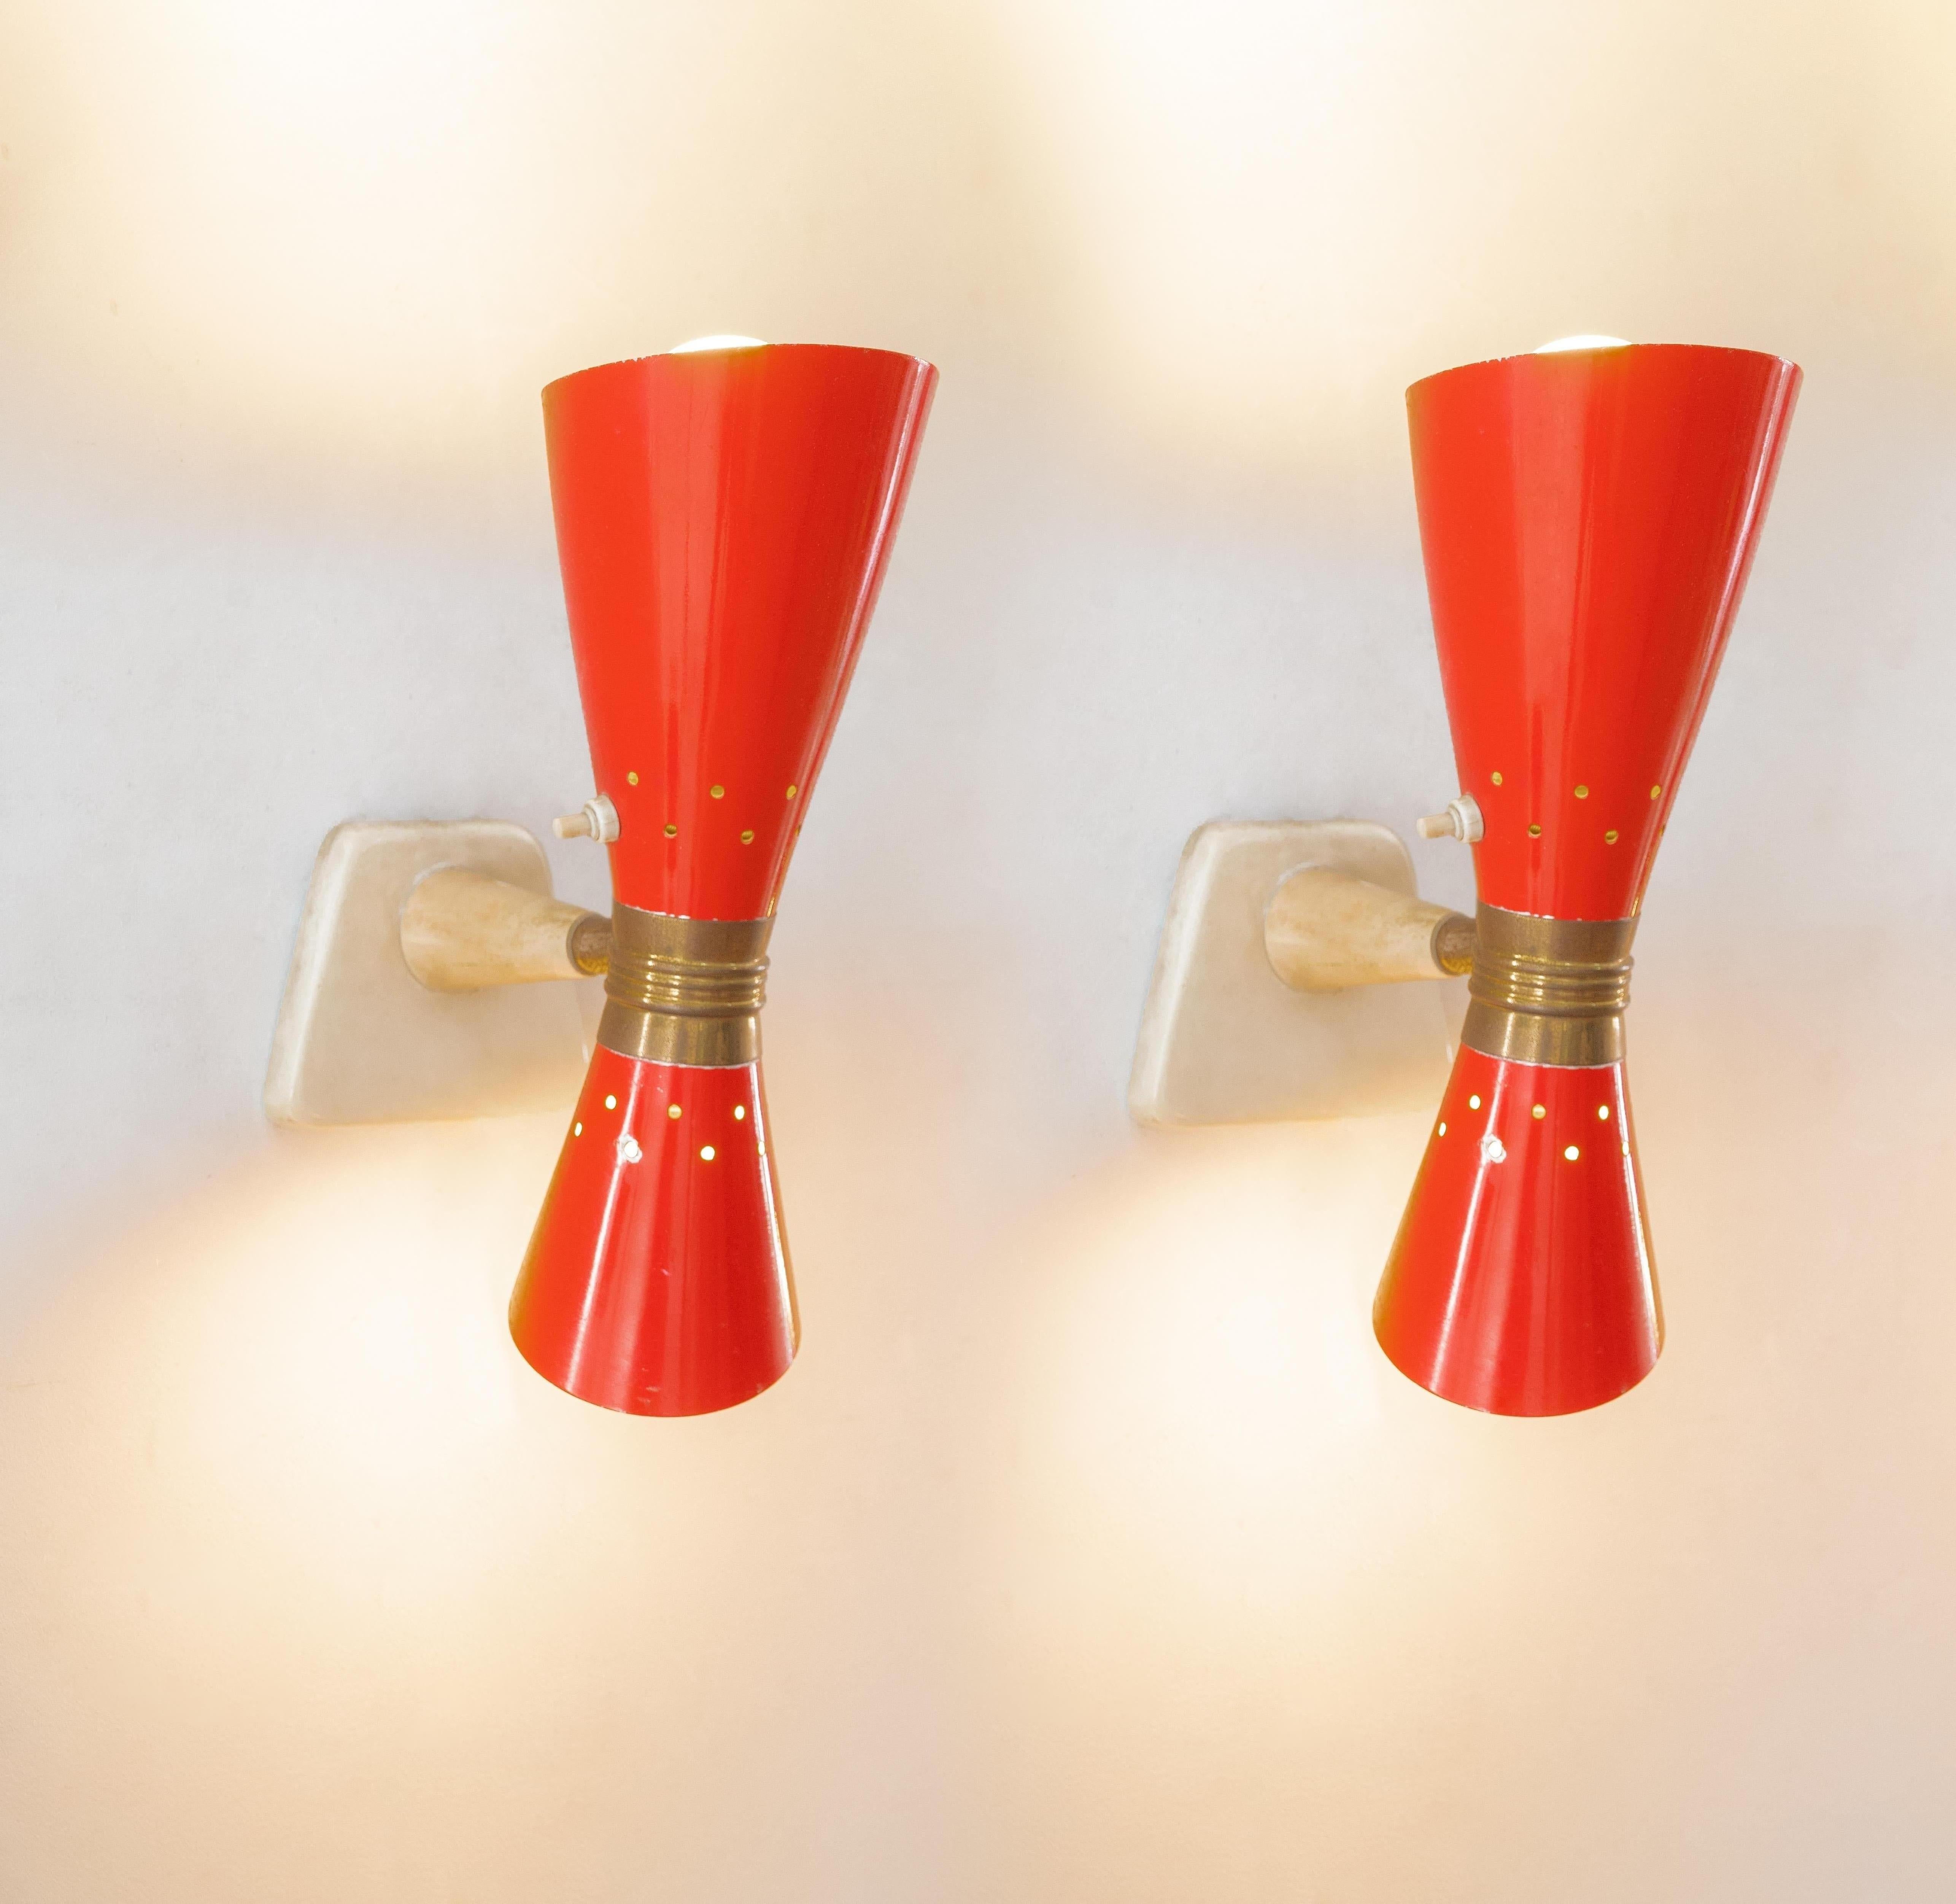 Gilardi & Barzaghi for stilnovo . Production Italy 1950 ca.
Pair of two-light wall lamps, body
painted metal biconical.
Turning 360 degrees  the biconical cone you can manage the light as you see fit
red, brass. Uses of time.
11 x 19 cm H. 29
A PAIR